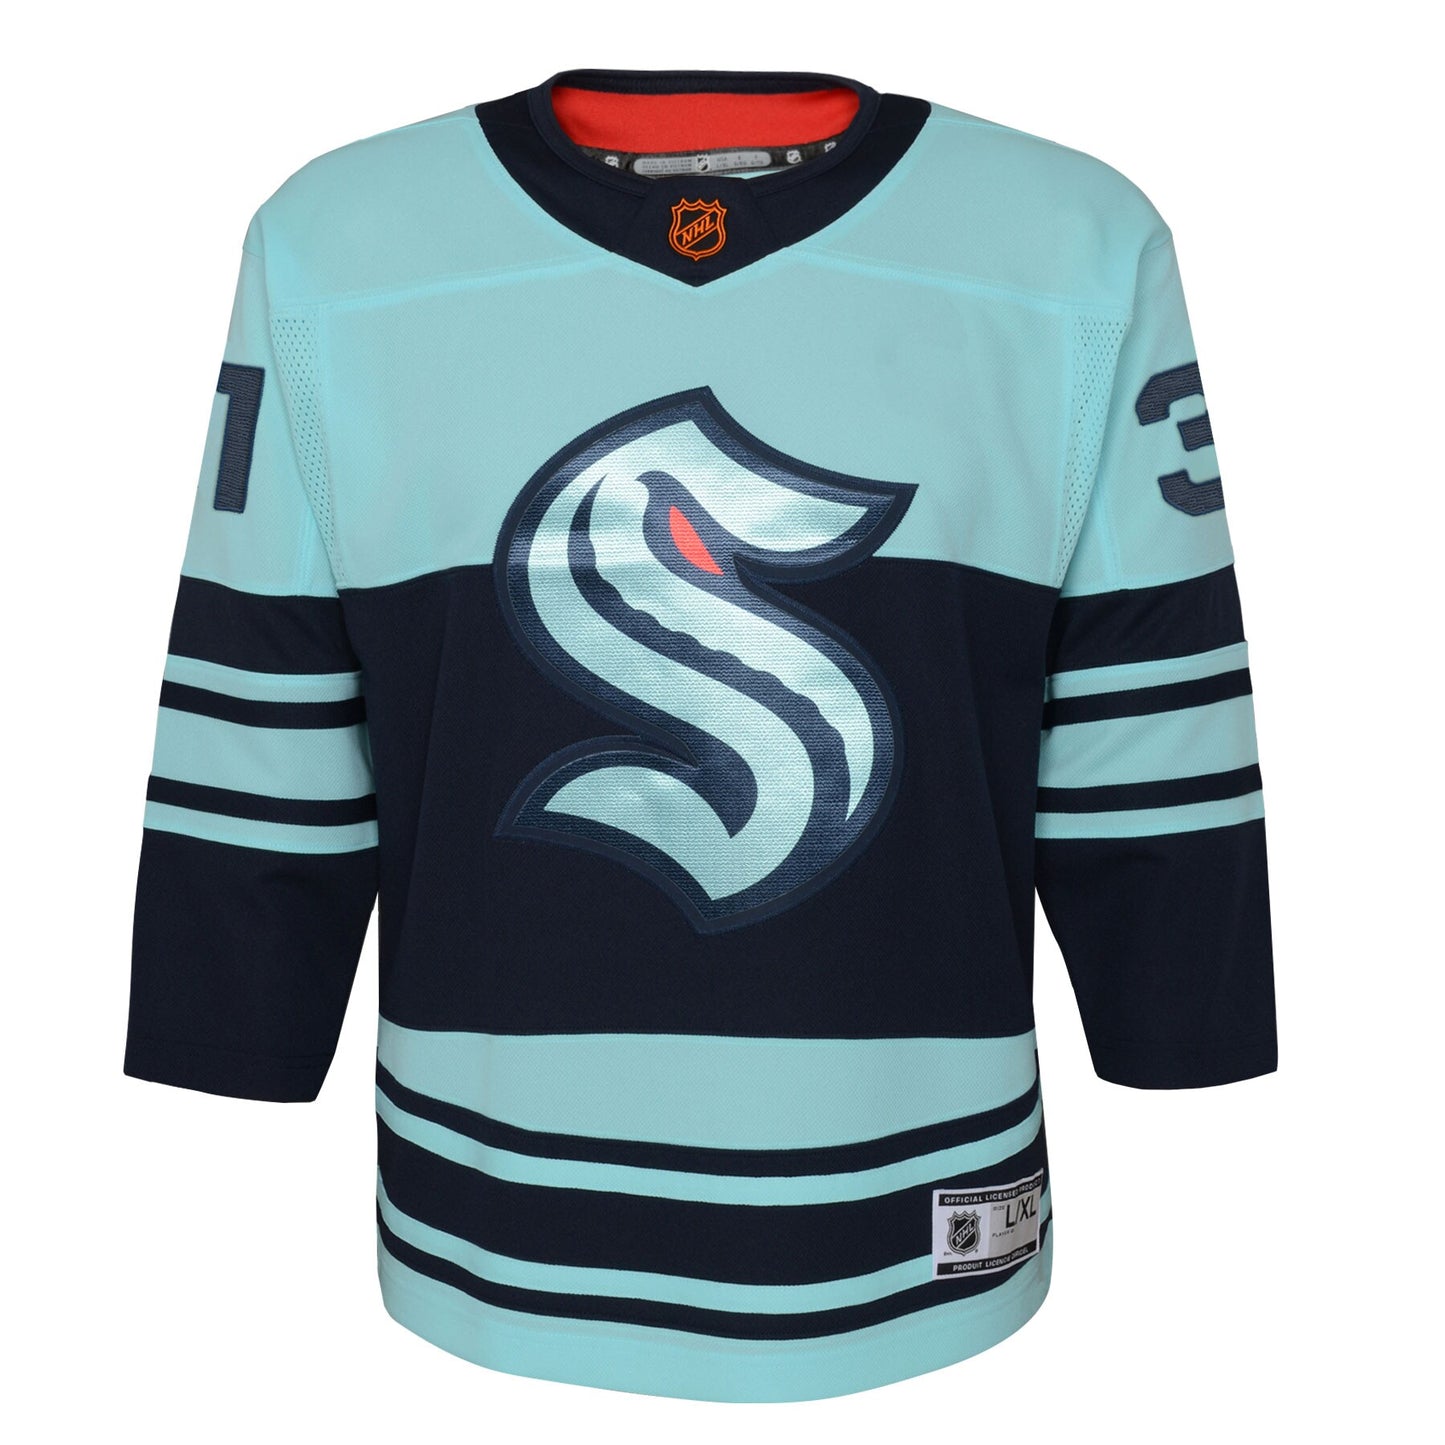 Philipp Grubauer Seattle Kraken Youth Special Edition 2.0 Premier Player Jersey - Teal